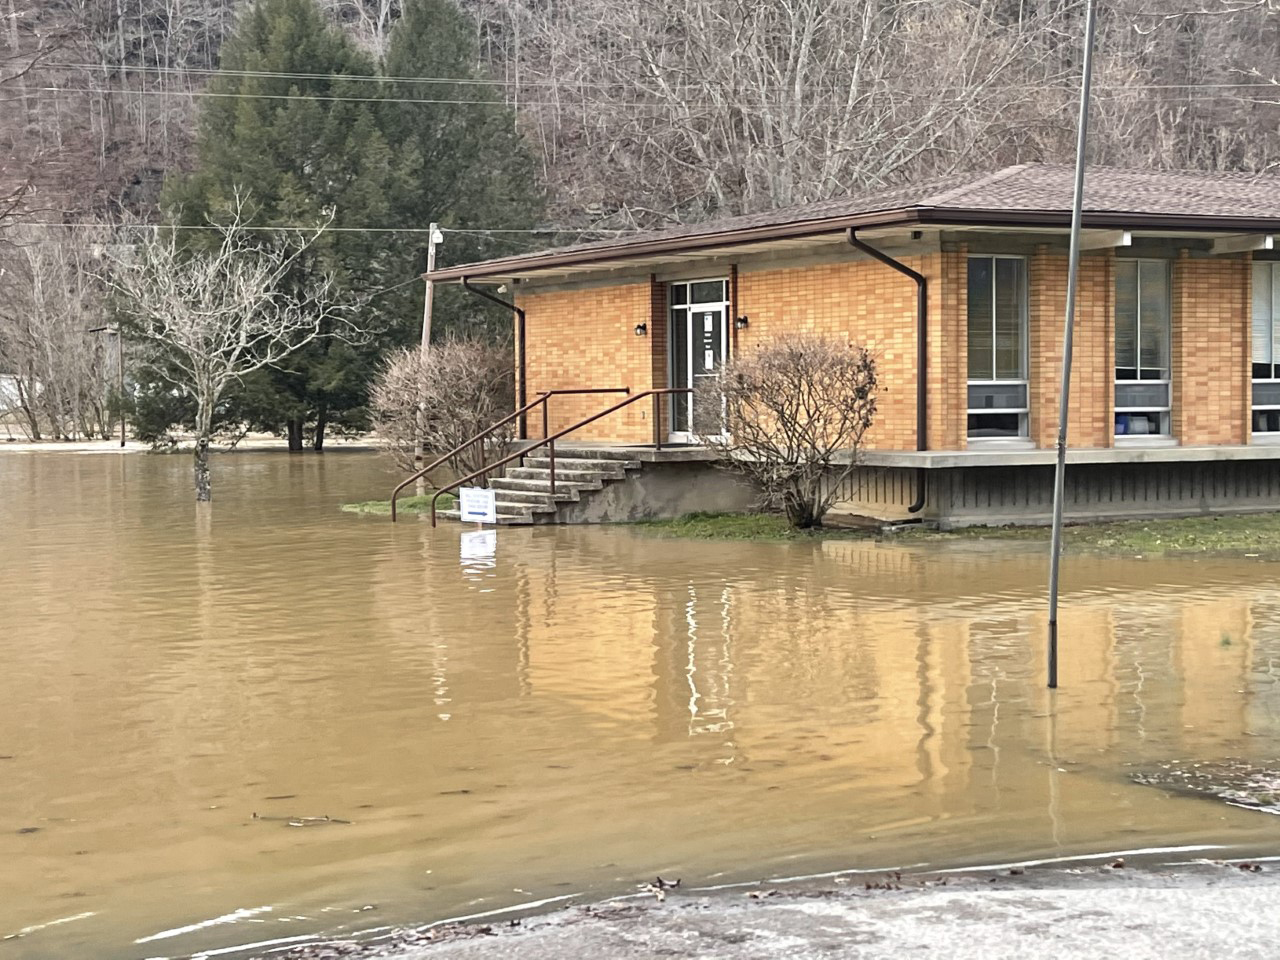 The main office building at UK's Robinson Center for Appalachian Resource Sustainability during flooding brought by torrential rains. Photo by Daniel Wilson